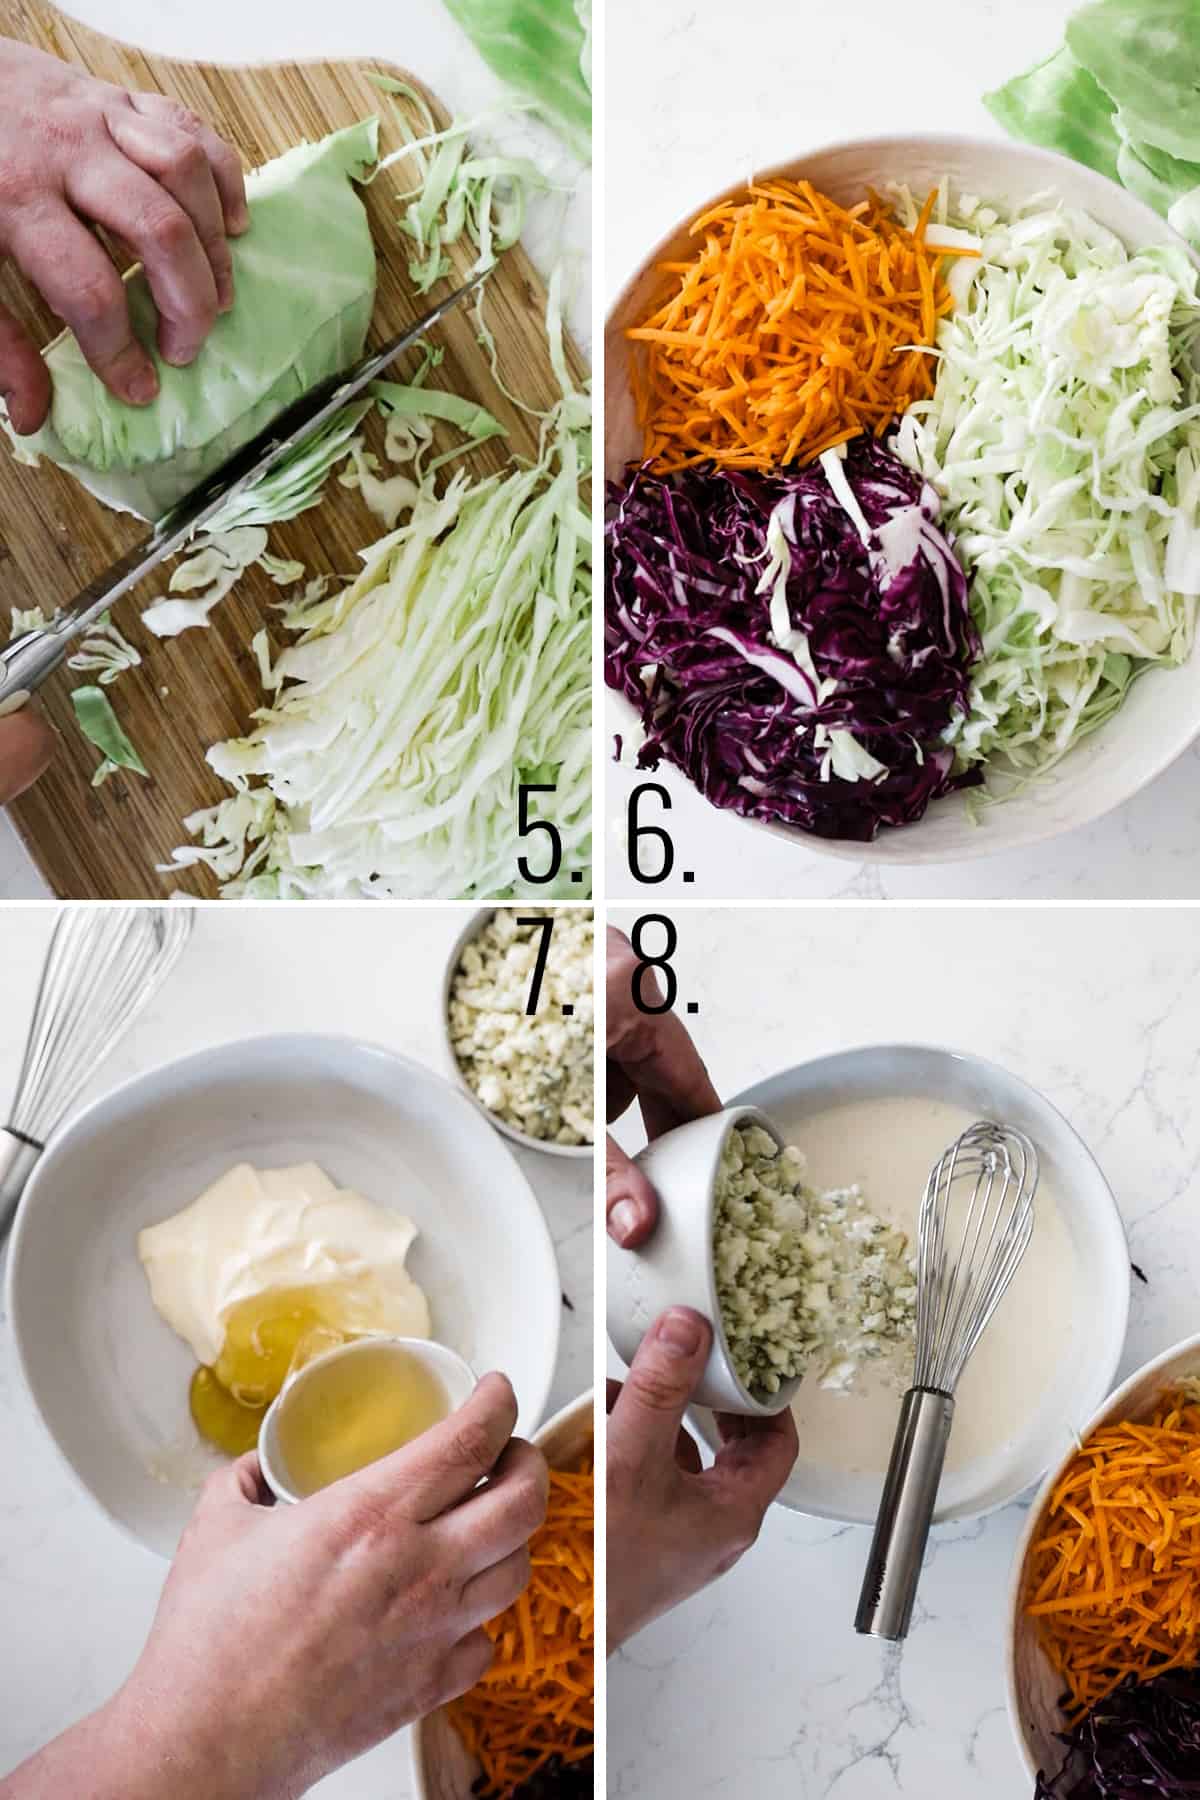 How to make coleslaw.